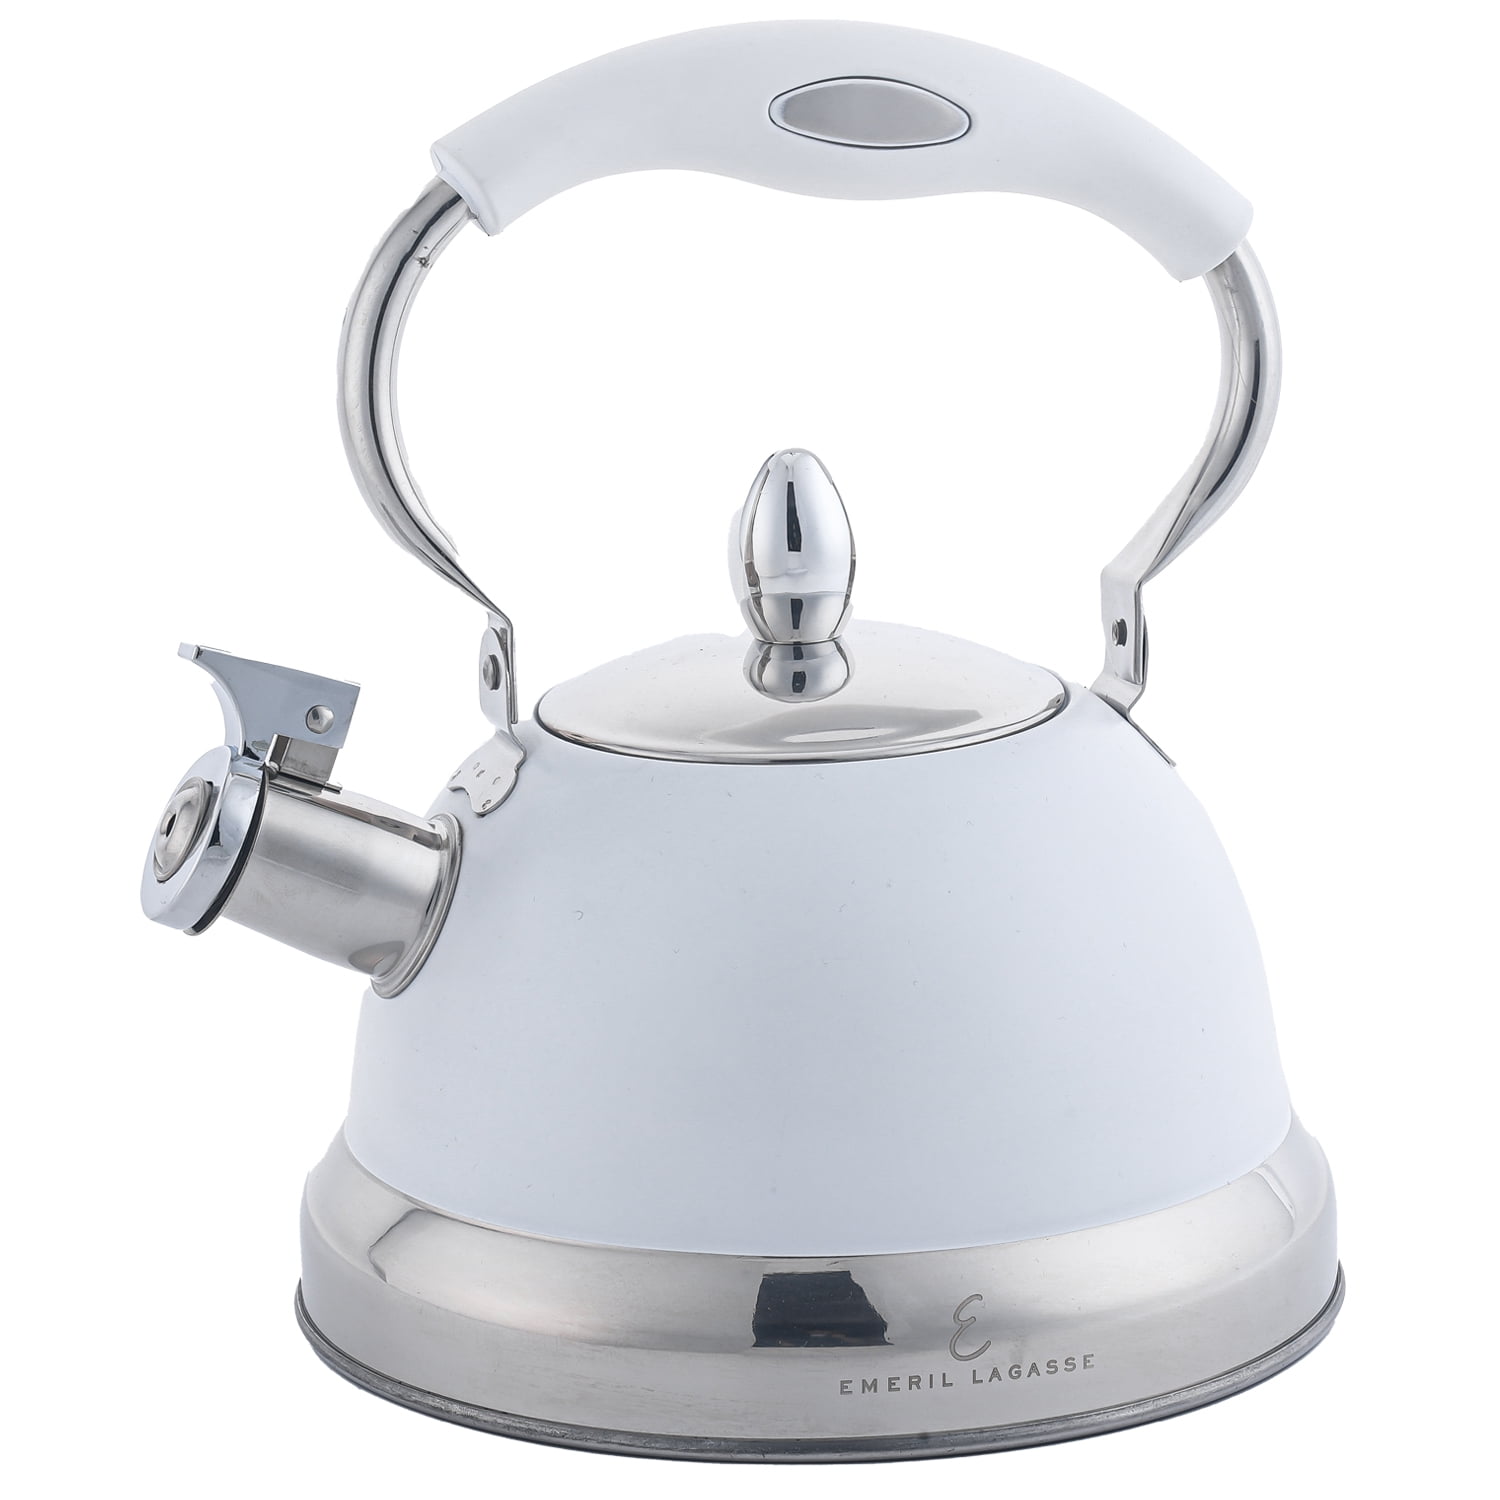 Emeril Lagasse 3.2 Quart/3 Liter Whistling Tea Kettle, Stainless Steel  Whistling Tea Pot for Induction Stove Top, Fast to Boil Water for Home  Kitchen